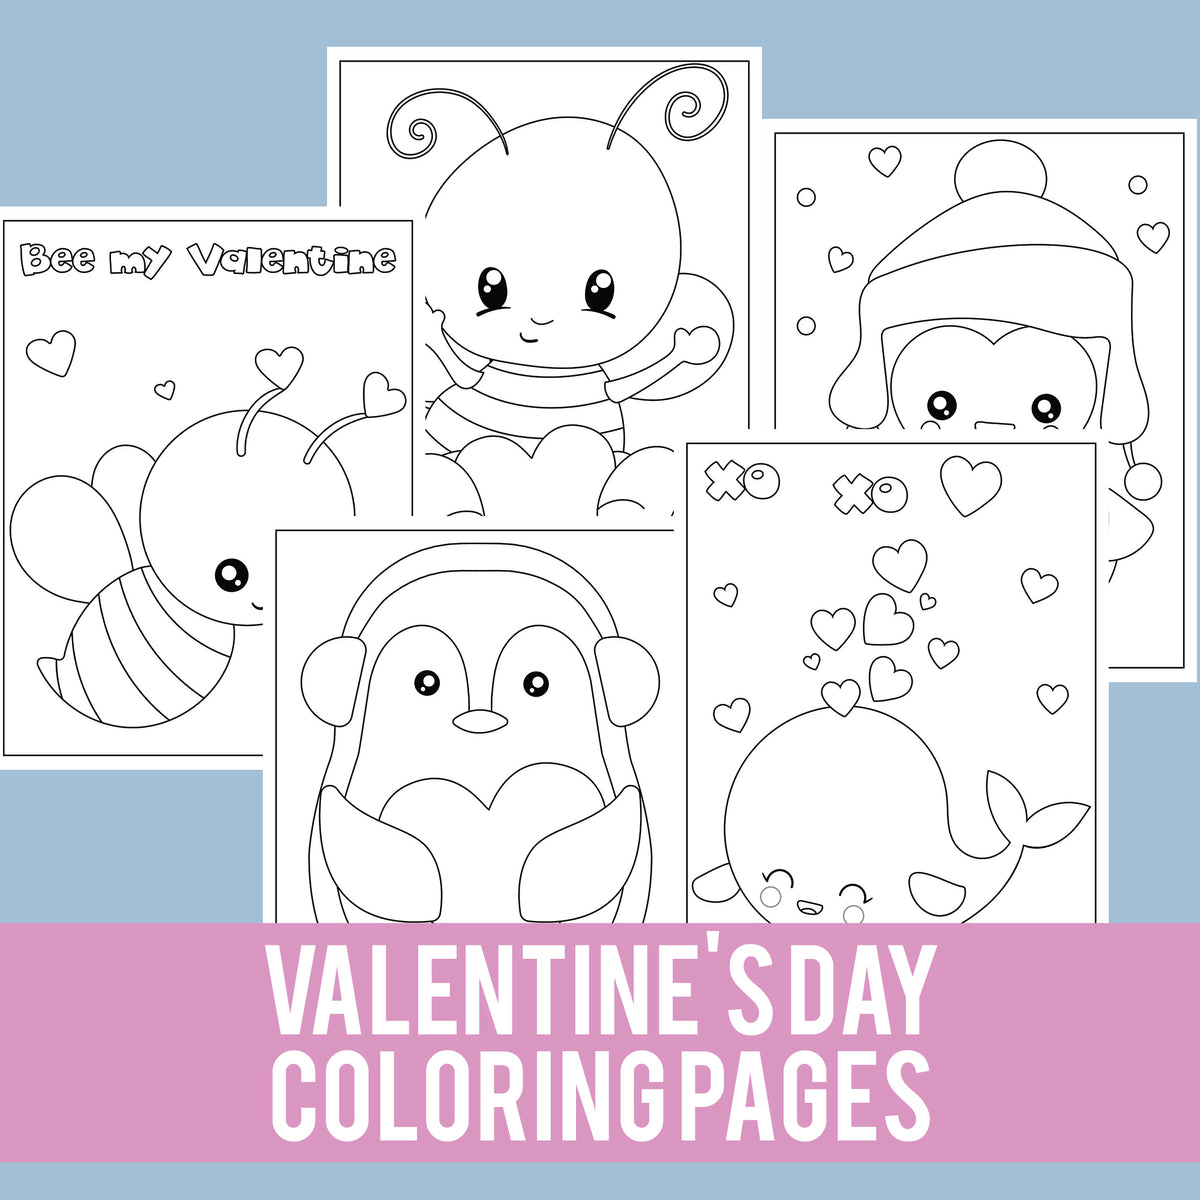 Valentines day coloring pages â messy little monster shop